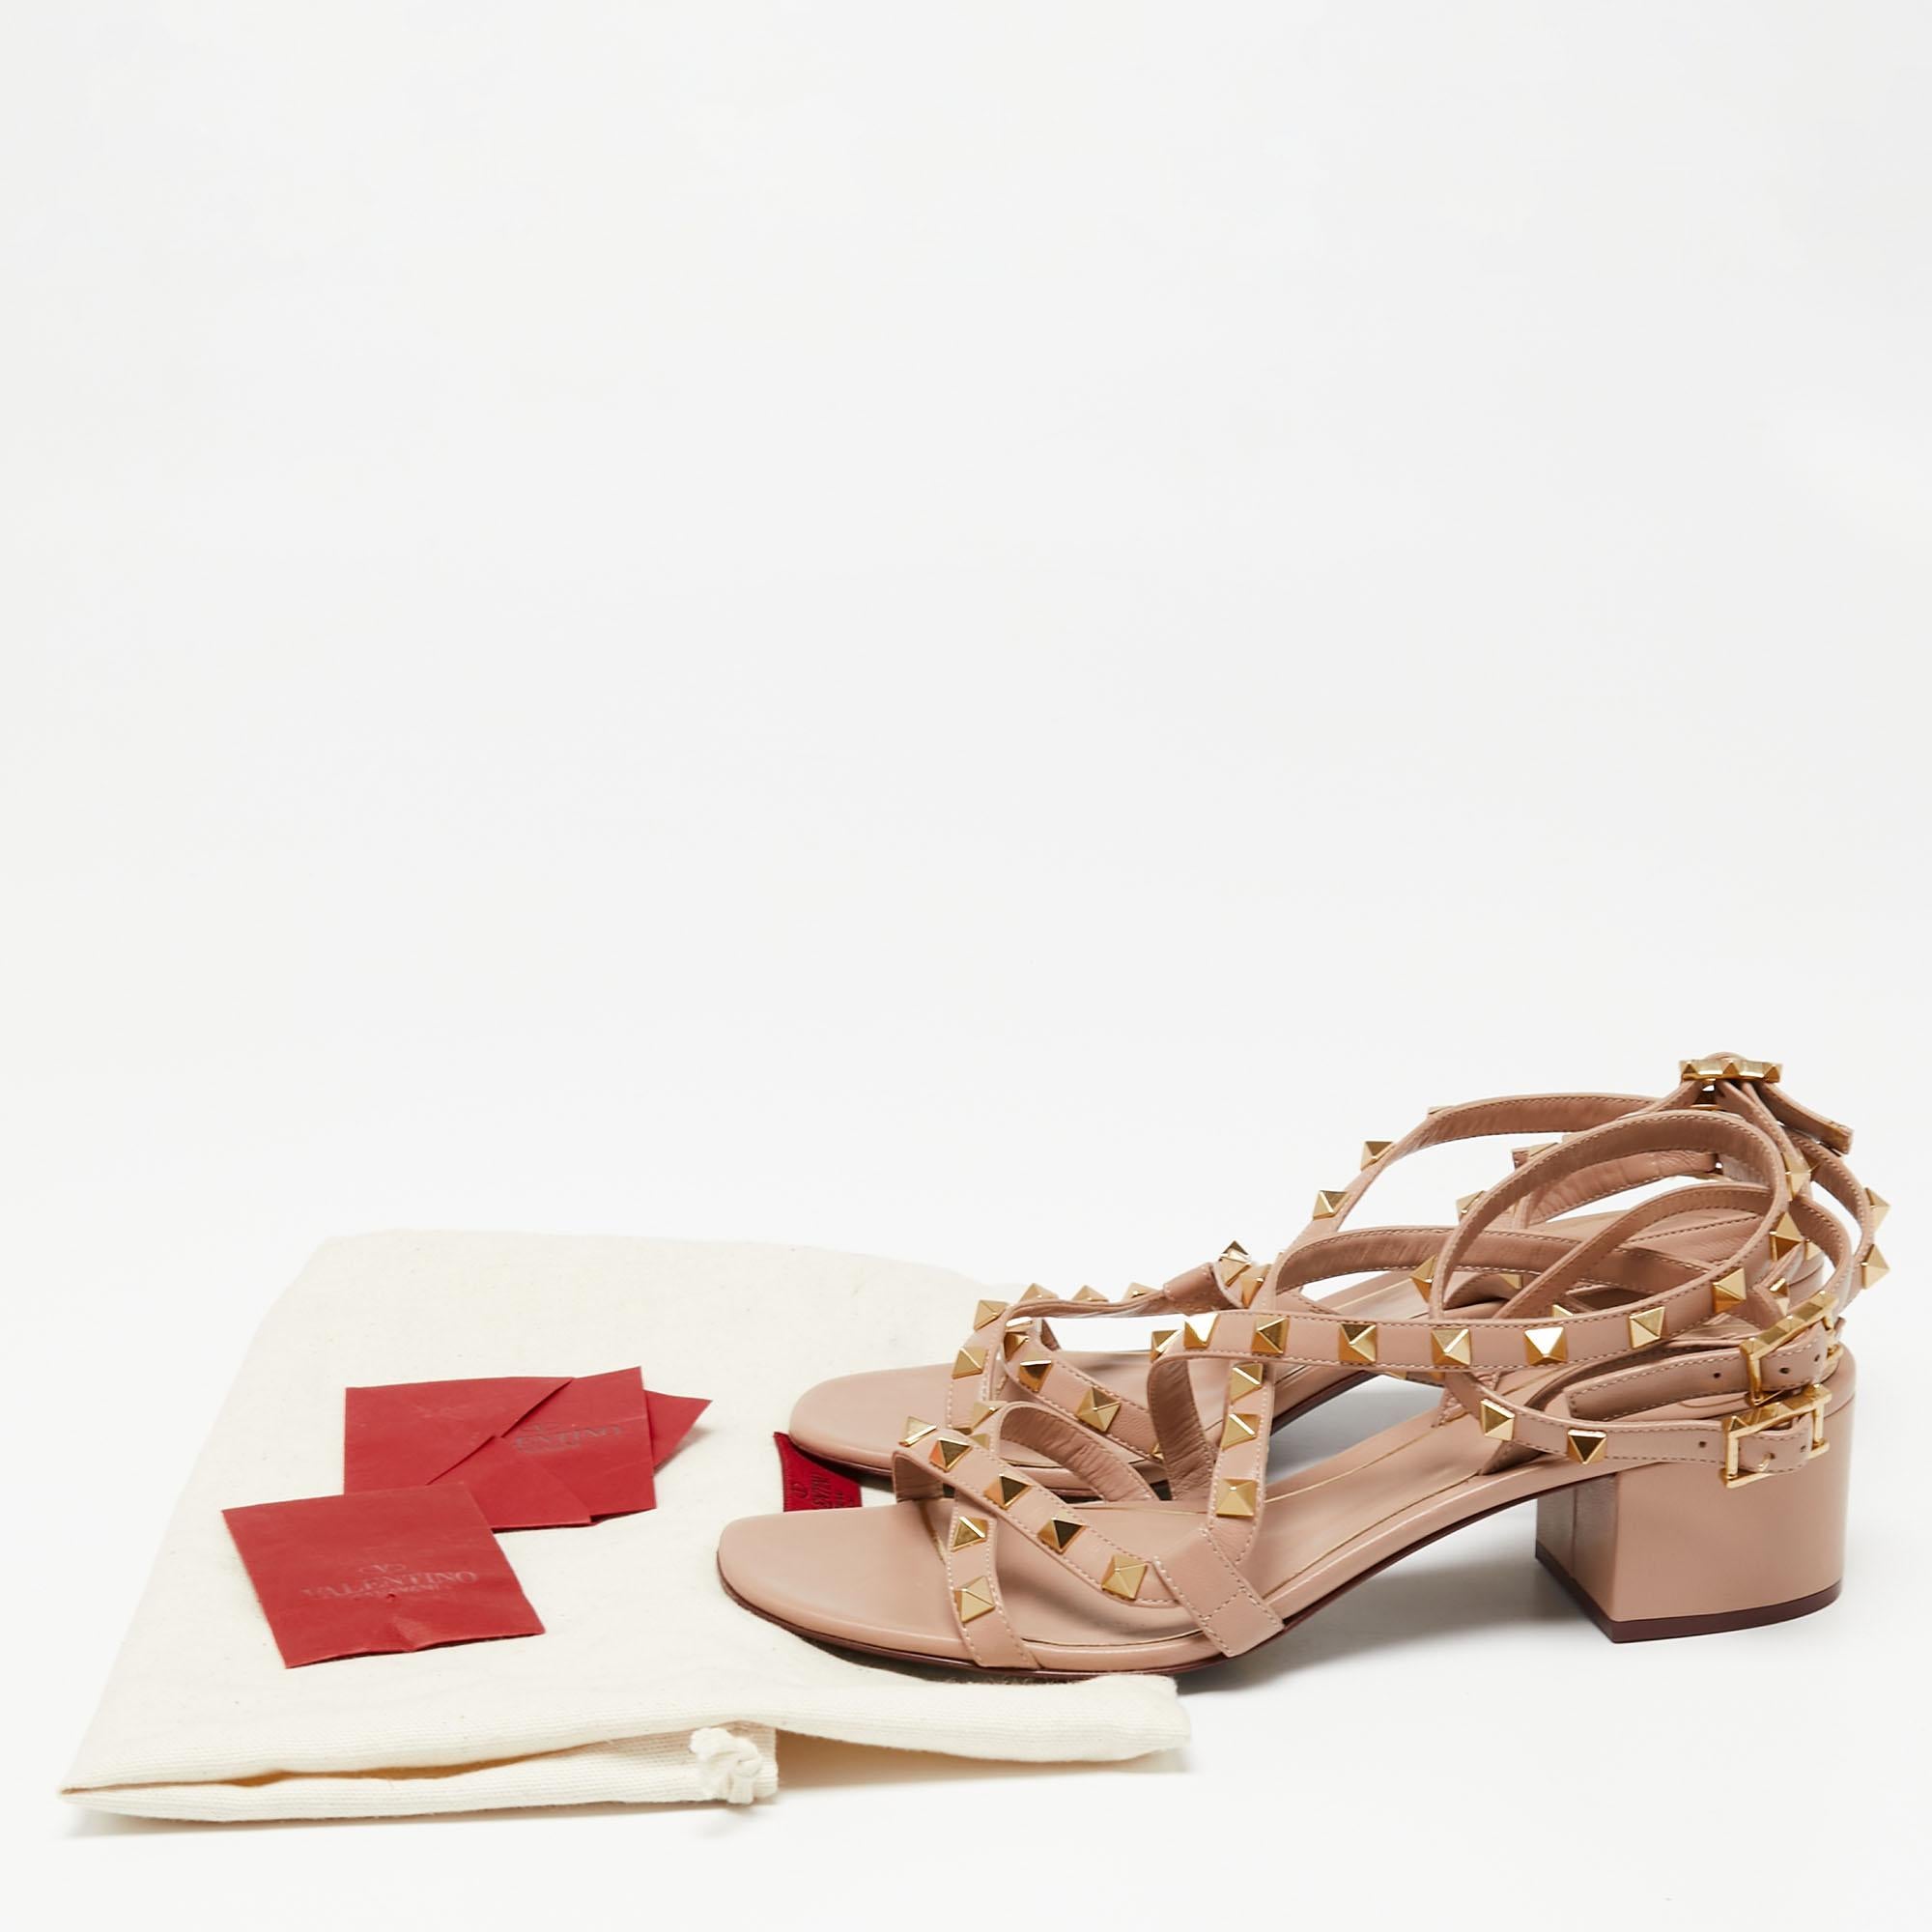 Valentino Dusty Pink Leather Rockstud Ankle-Strap Block Heel Sandals Size 38 1